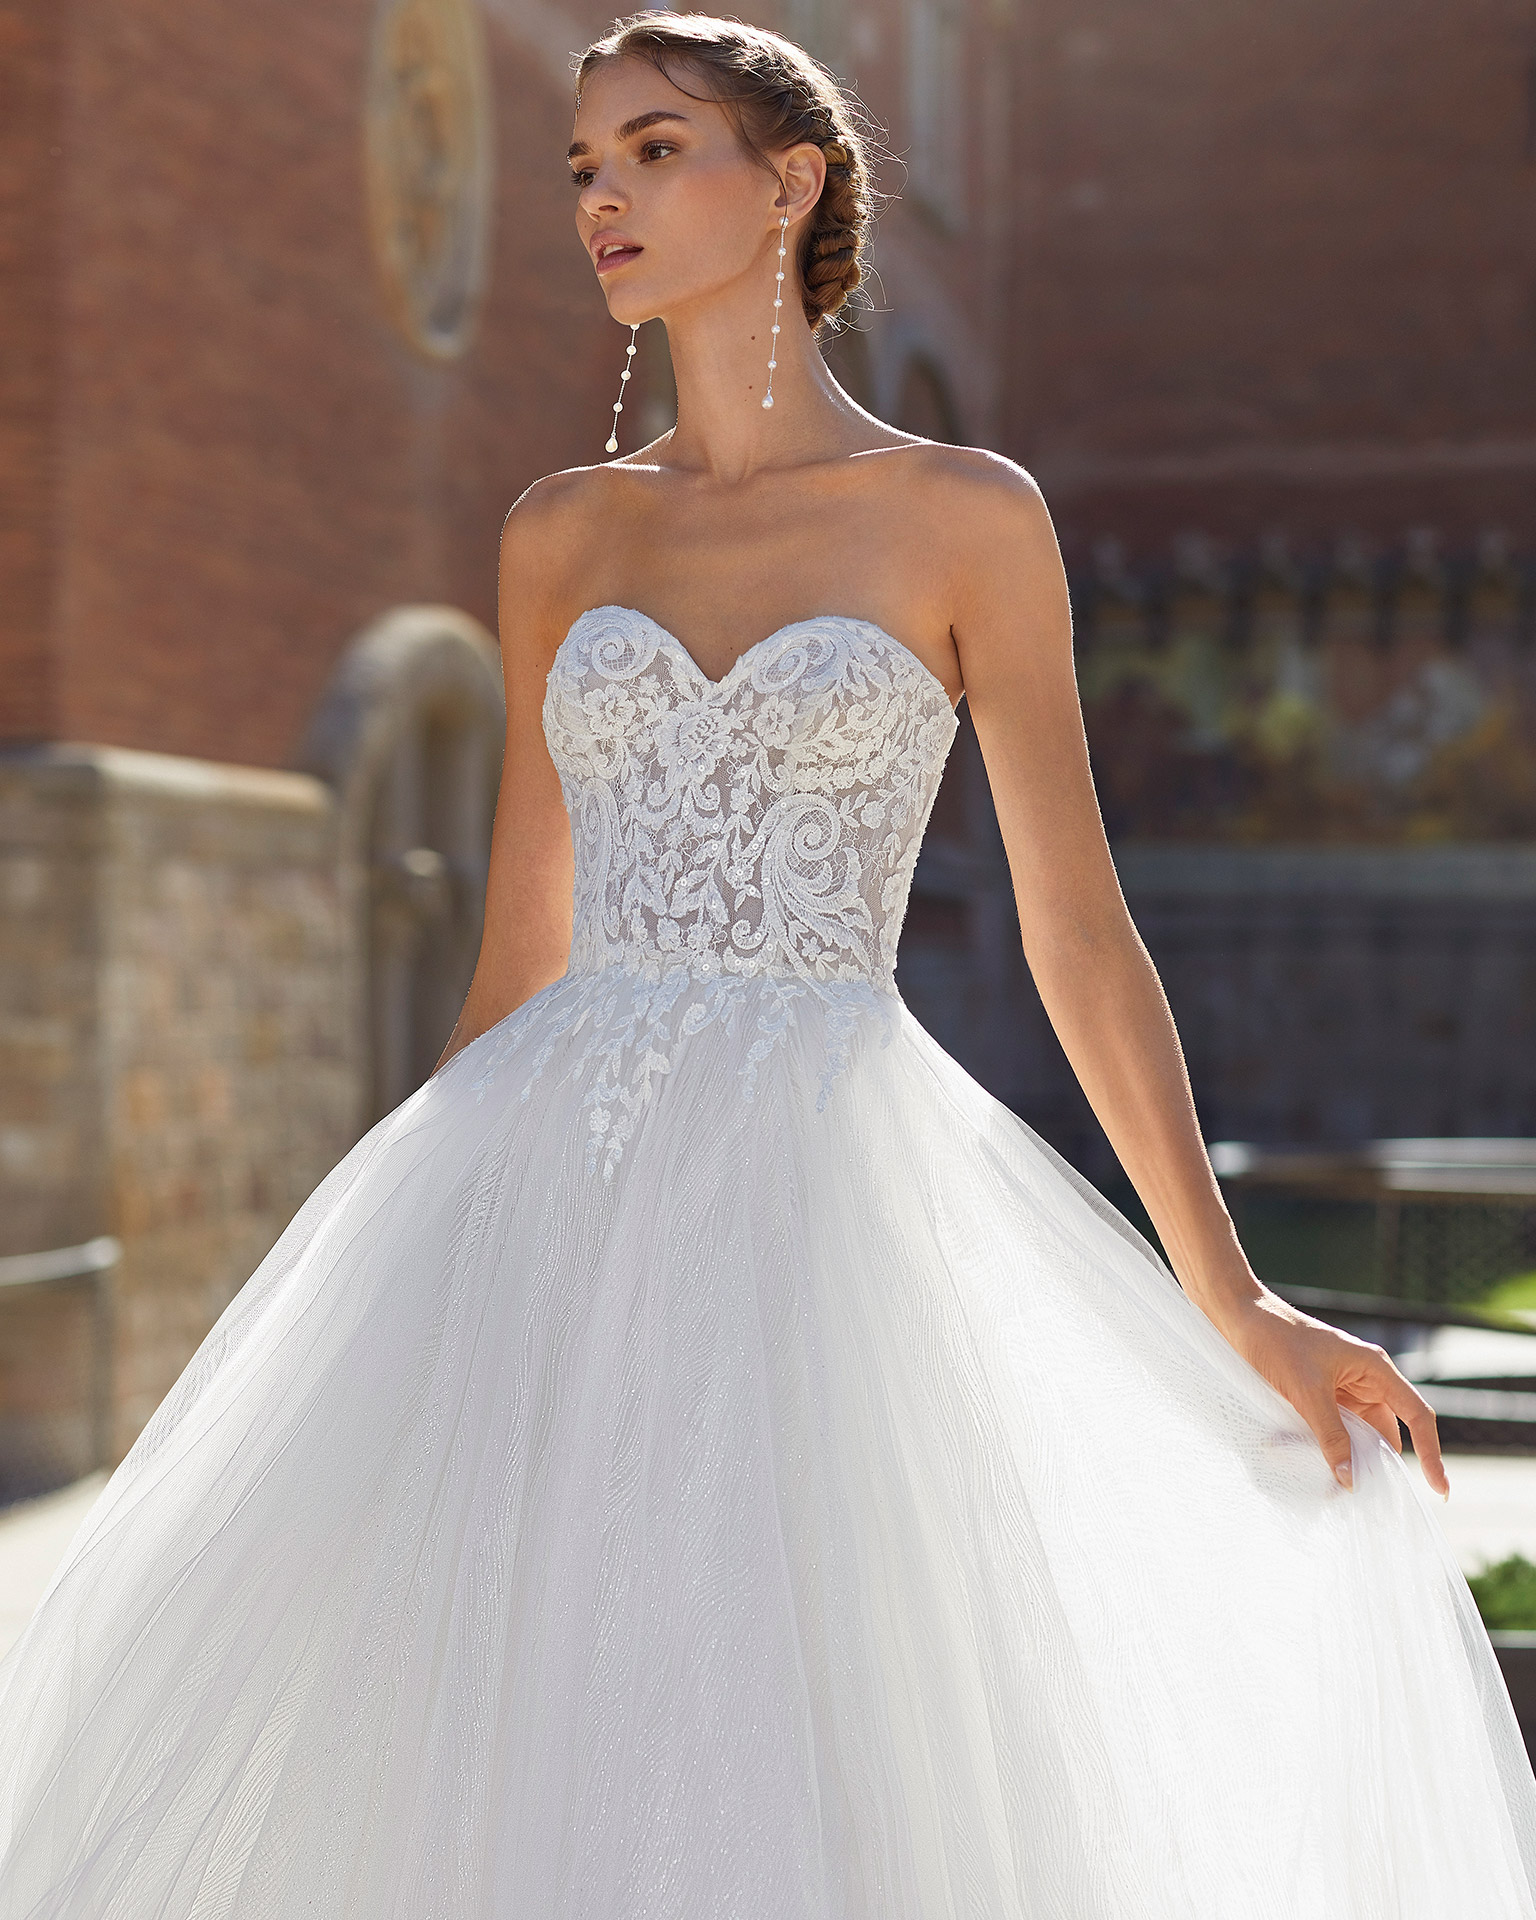 Princess-style wedding dress in beaded lace and tulle. Strapless neckline and glitter underskirt. 2021  Collection.